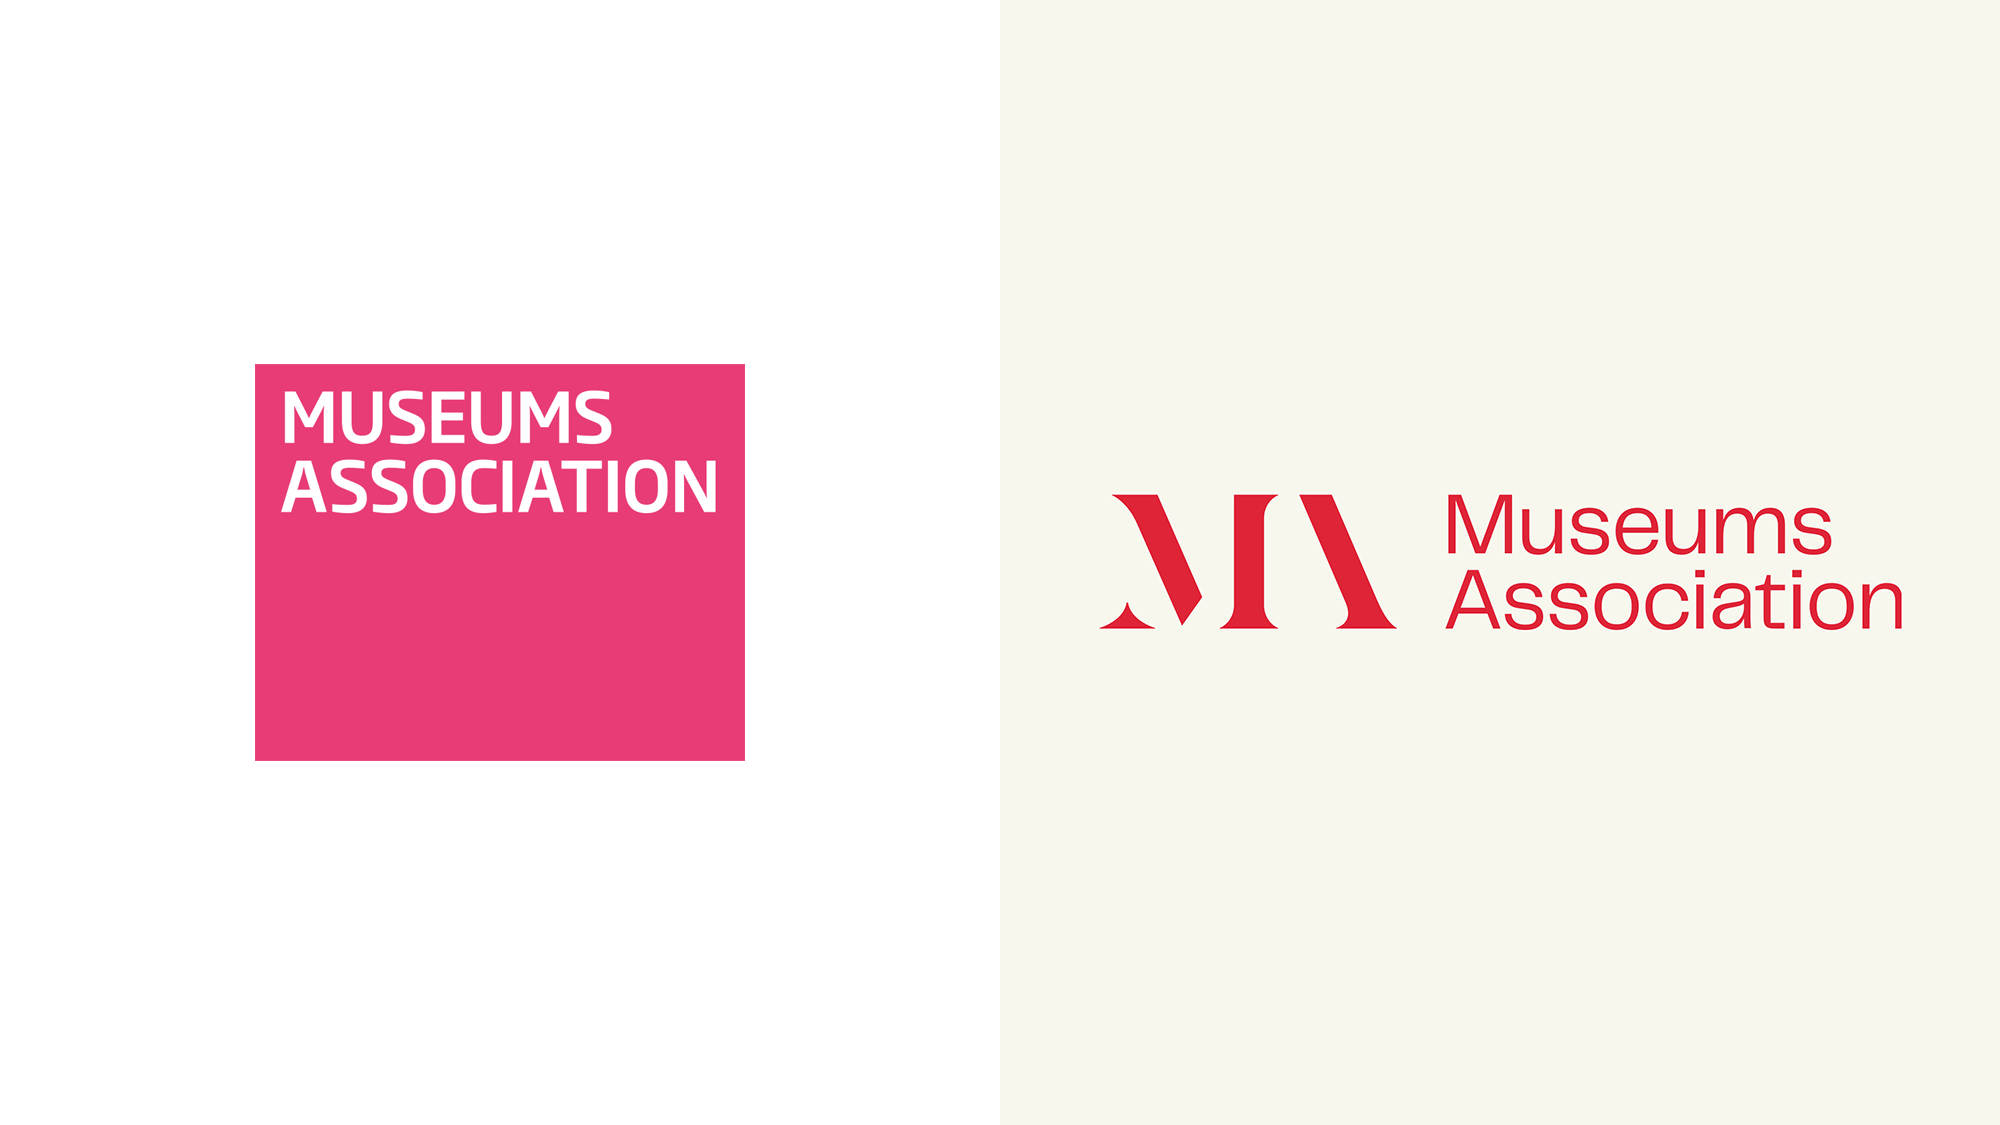 Brand New: New Logo and Identity for Museums Association by Studio Output